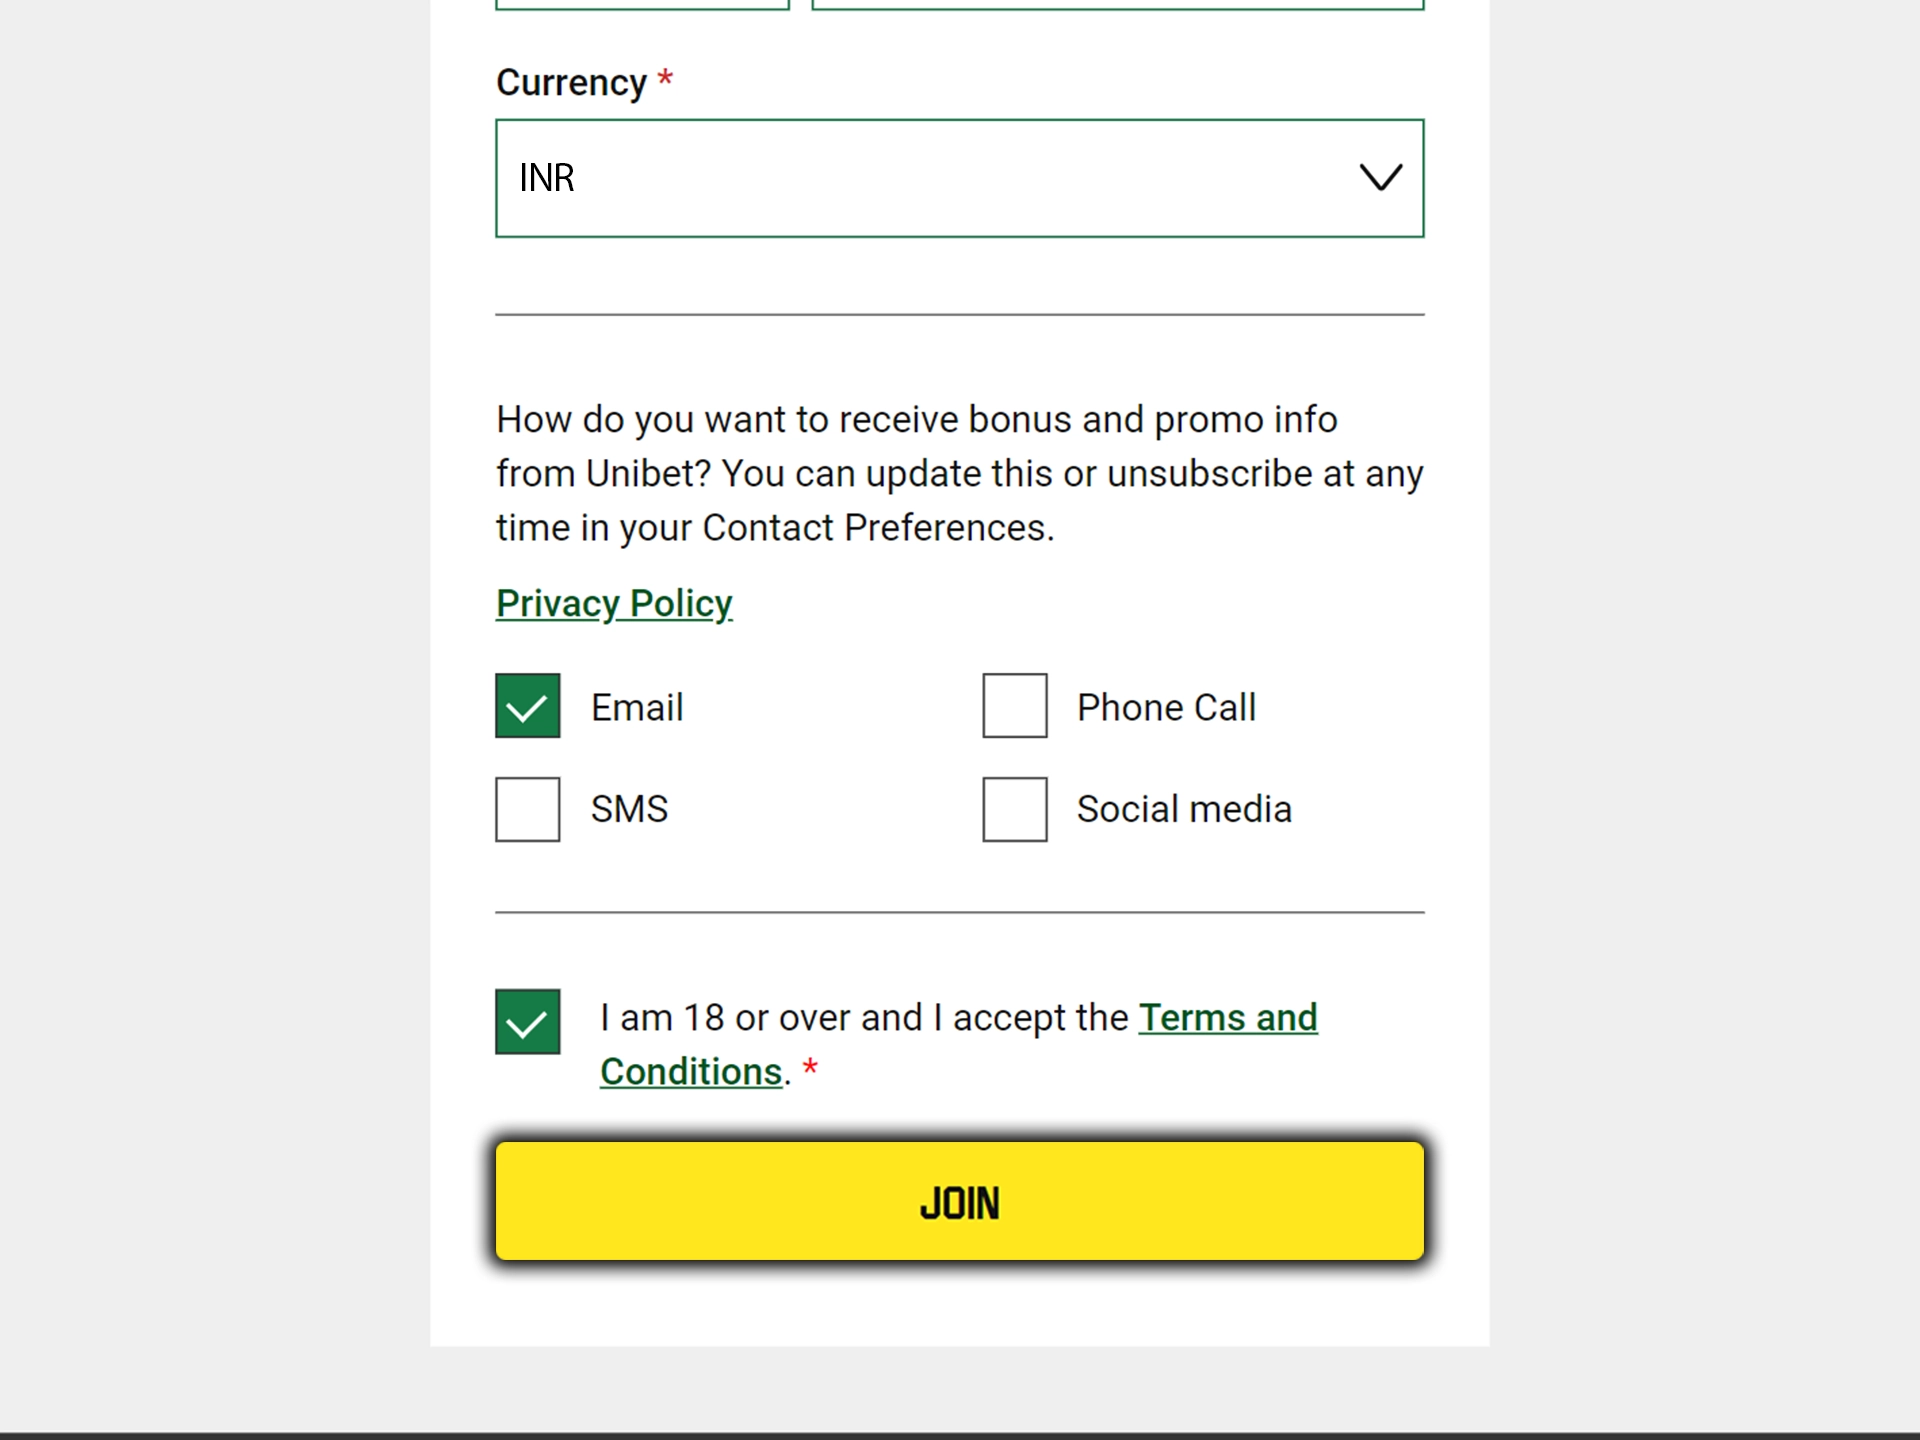 Check the information entered and confirm the creation of your Unibet account.